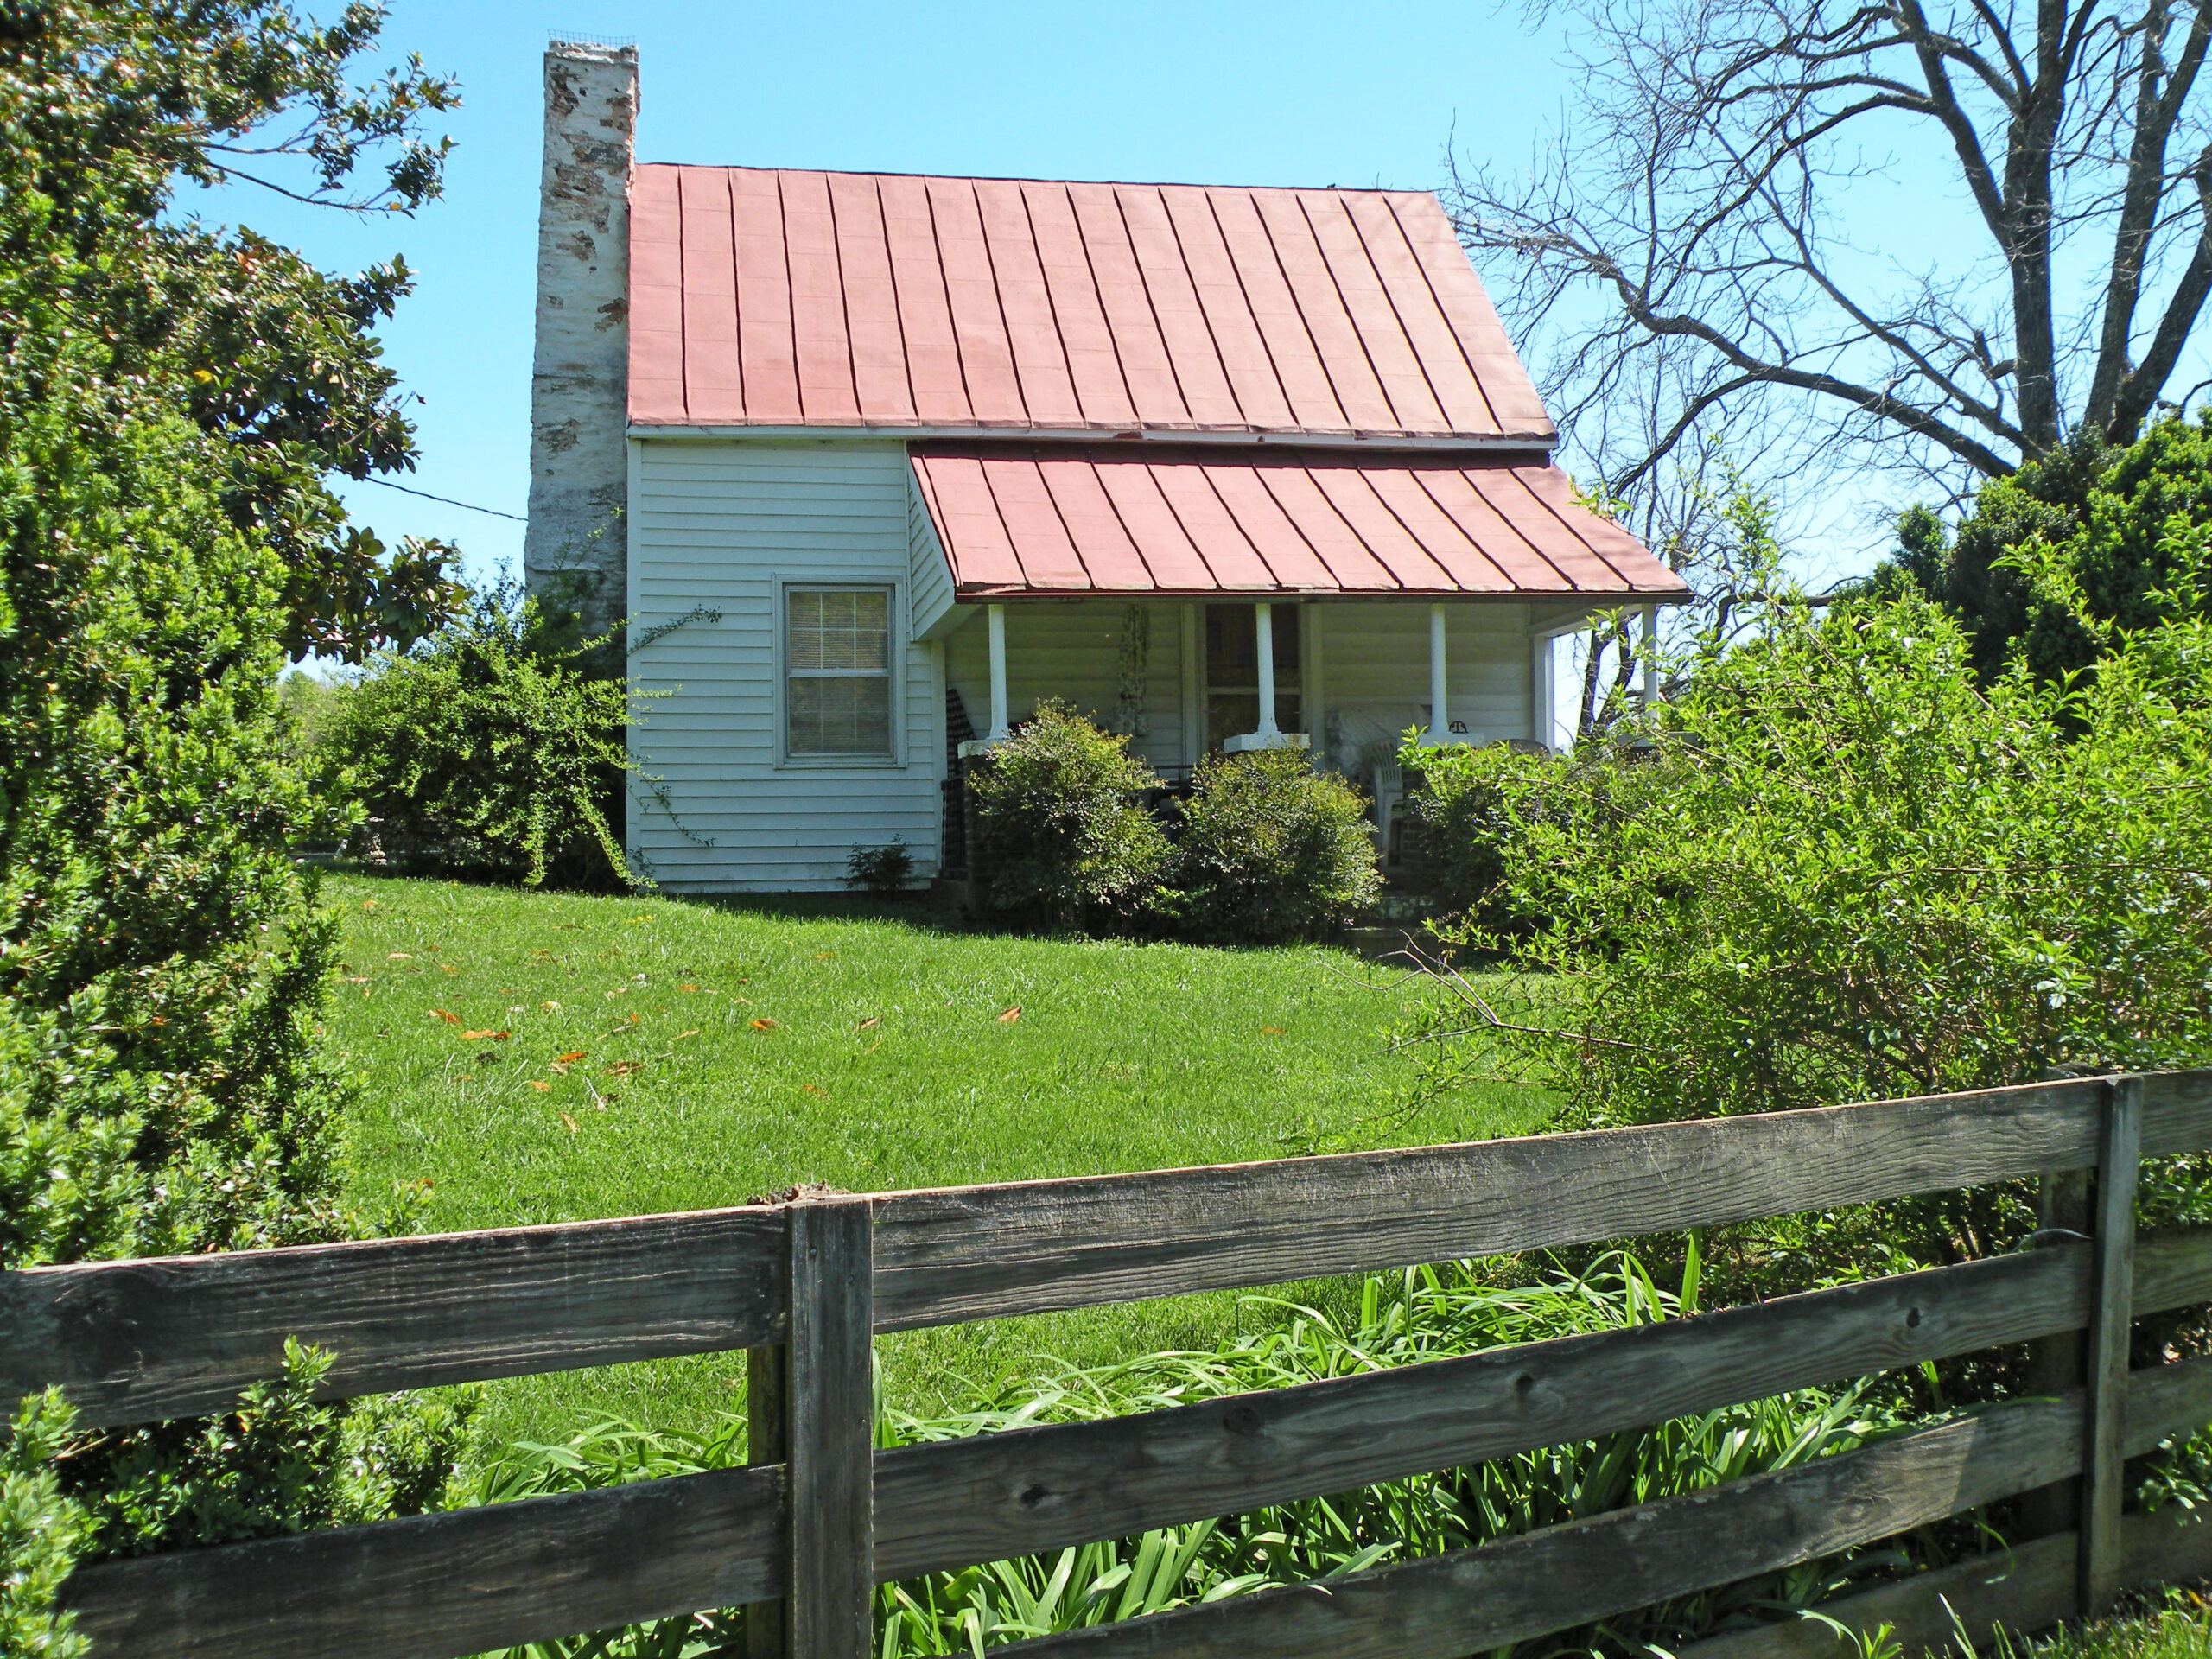 Miller's House. Photo credit: Brightwell Family, 2012